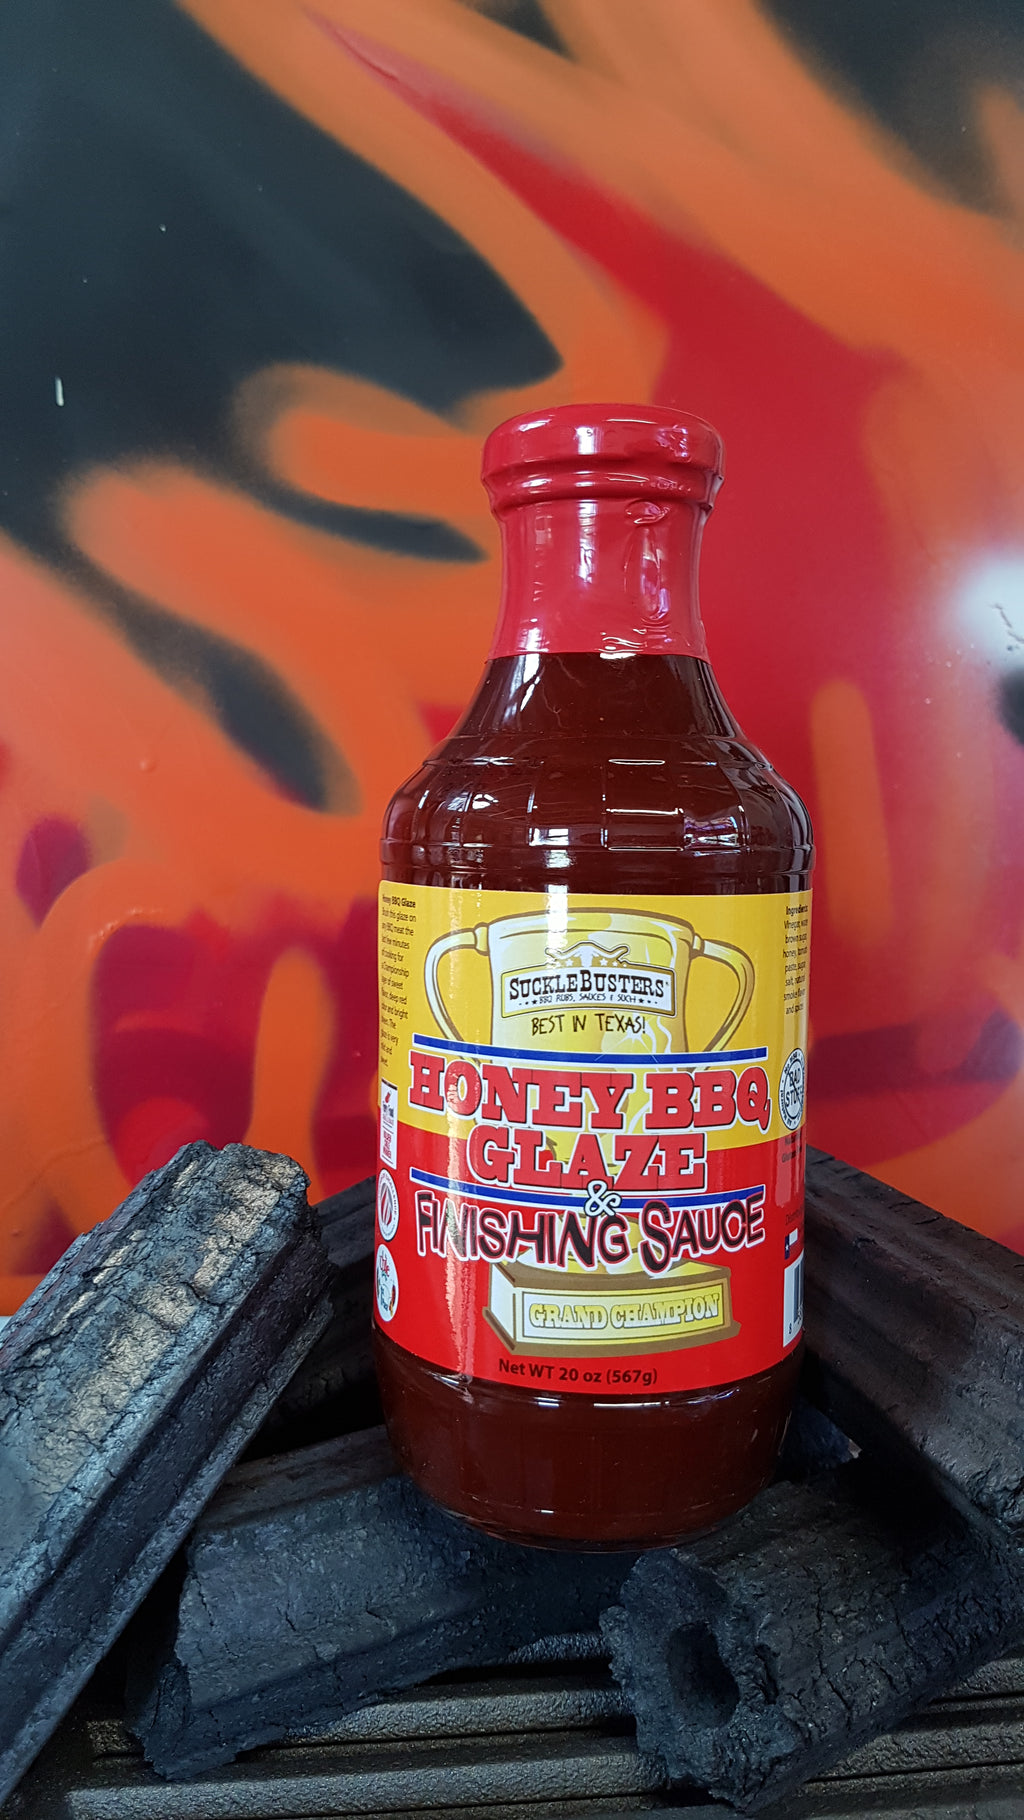 Honey BBQ Glaze & Finishing Sauce 567g by Sucklebusters